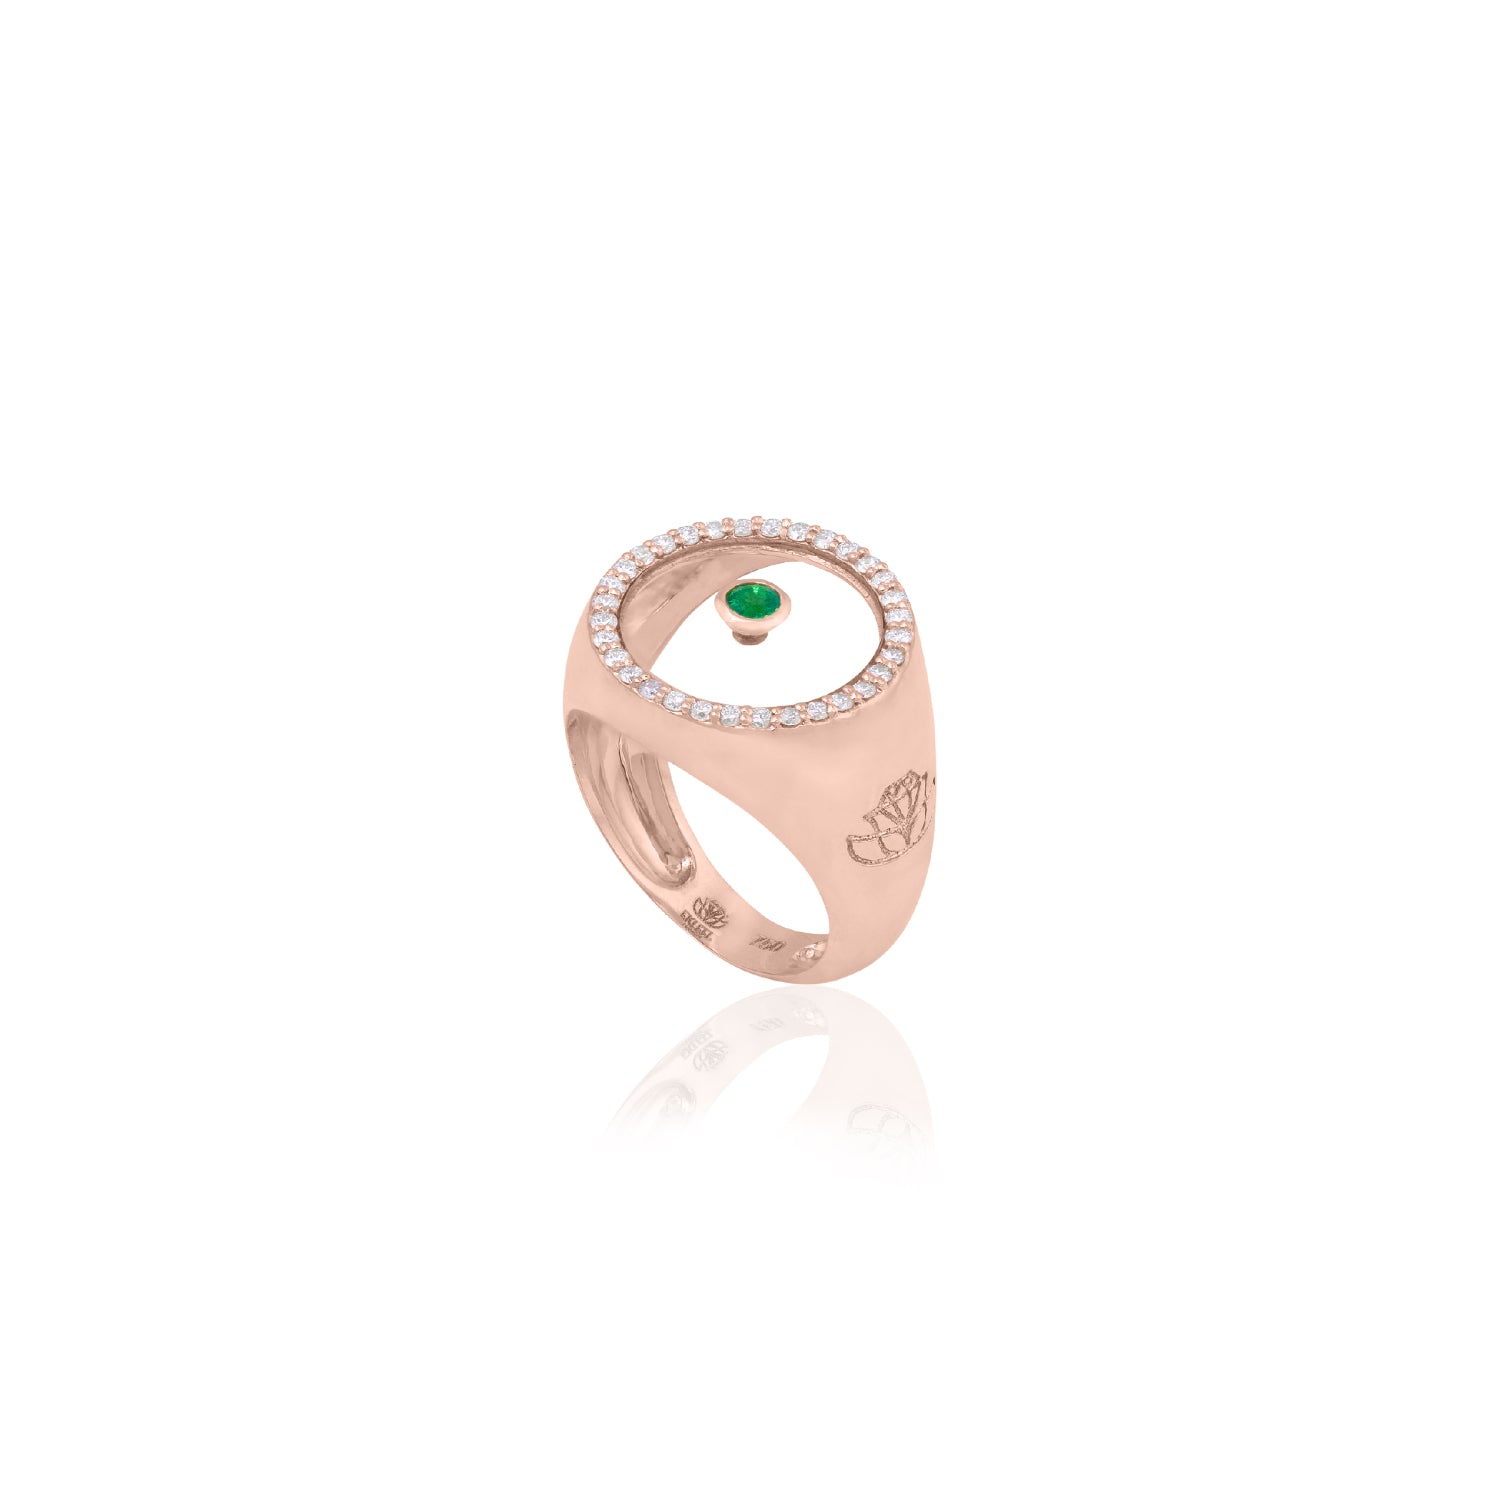 Emerald May Birthstone Ring in Rose Gold